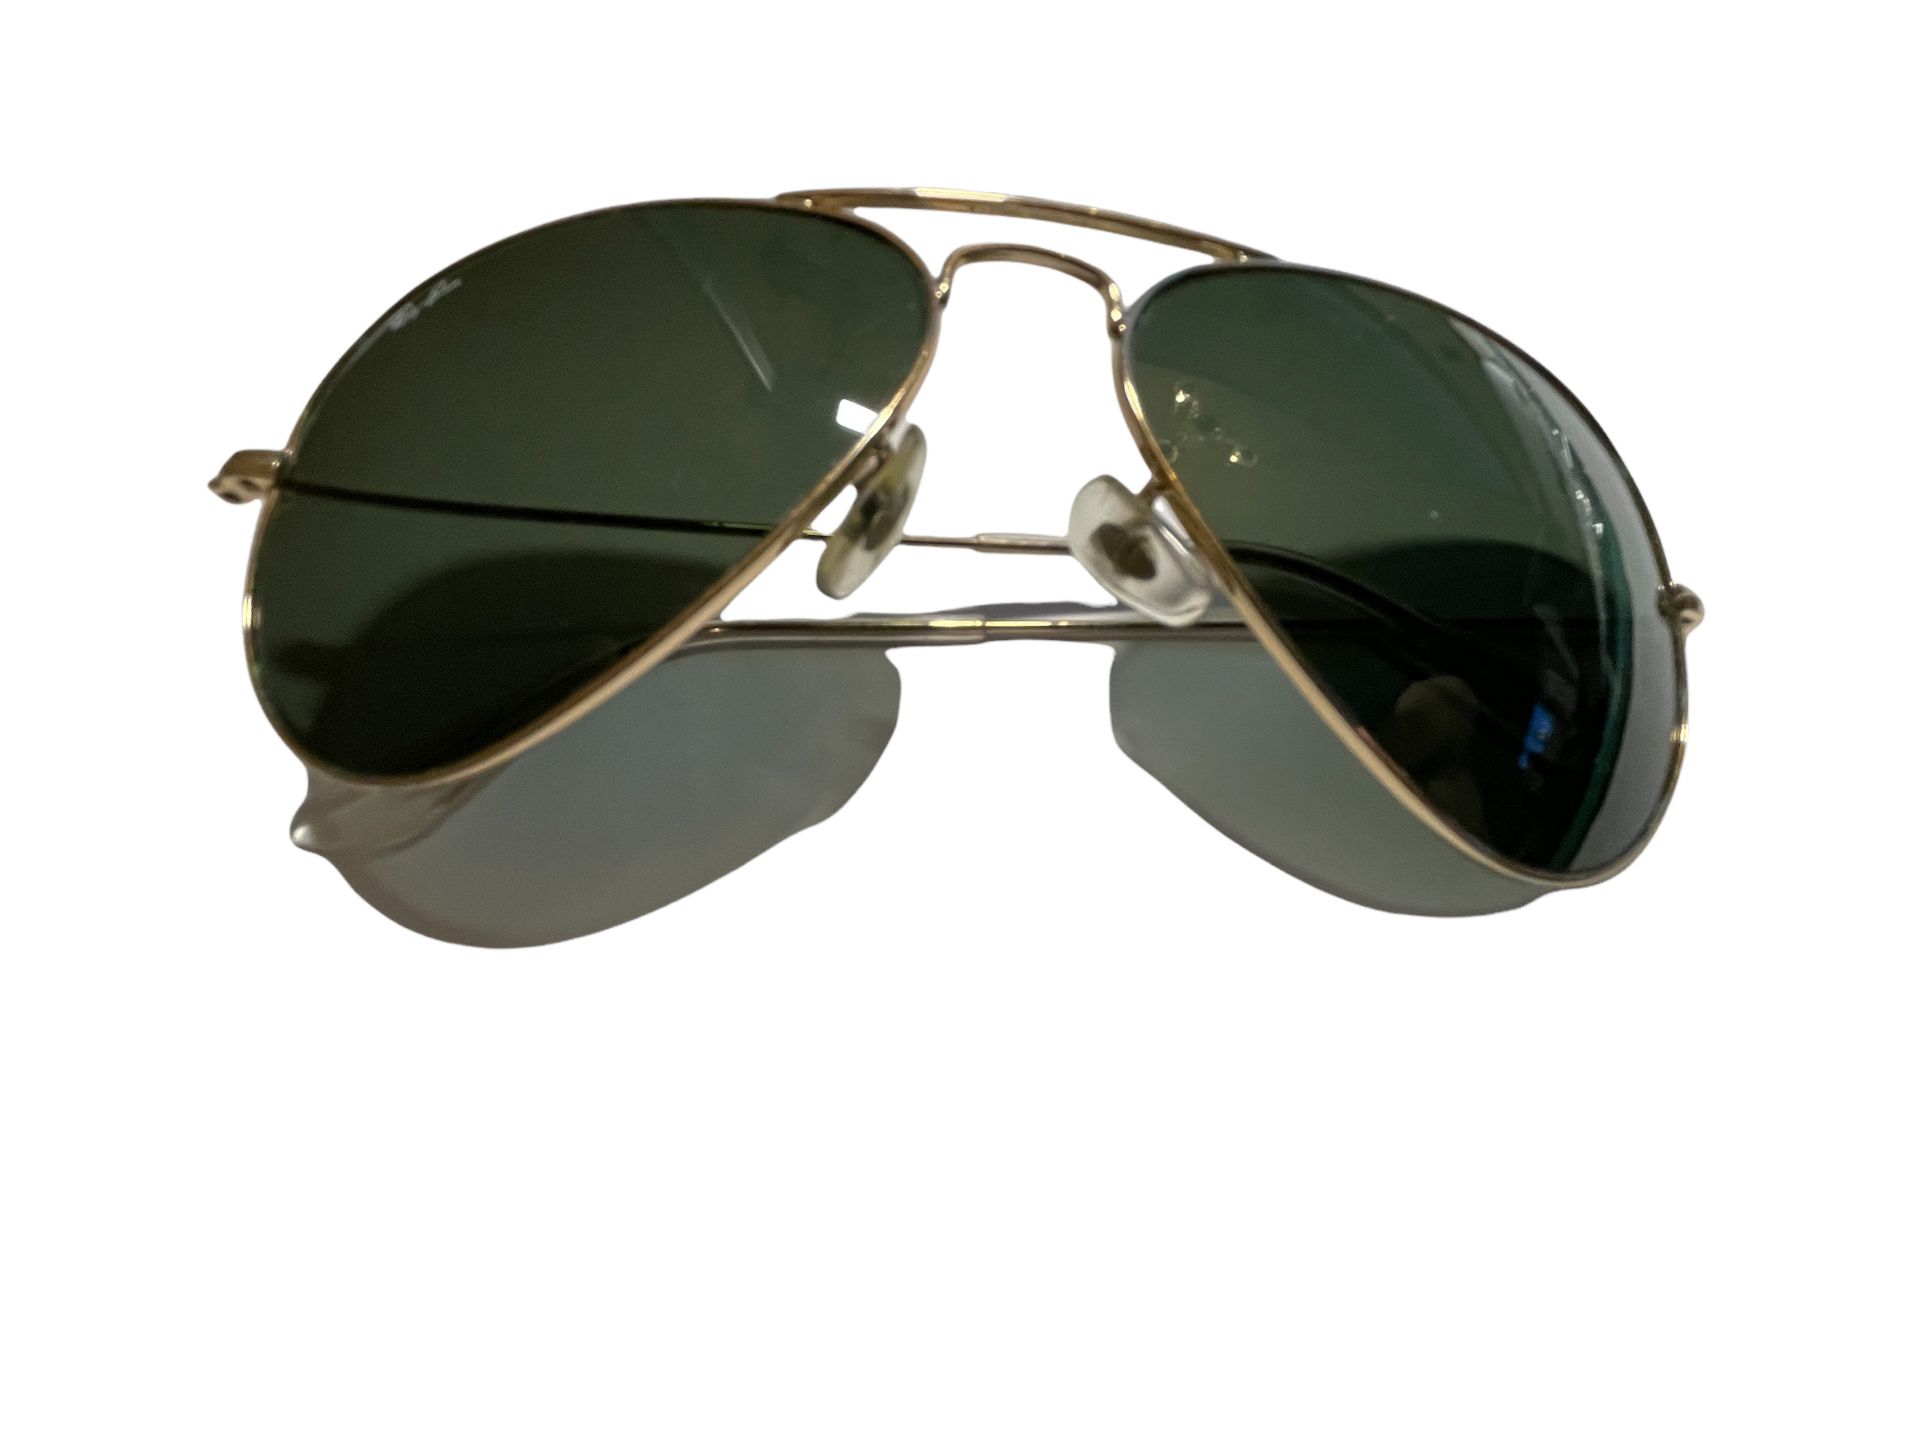 Lost Ray Ban Aviator Sunglasses with case on our private jet charter. - Image 3 of 6